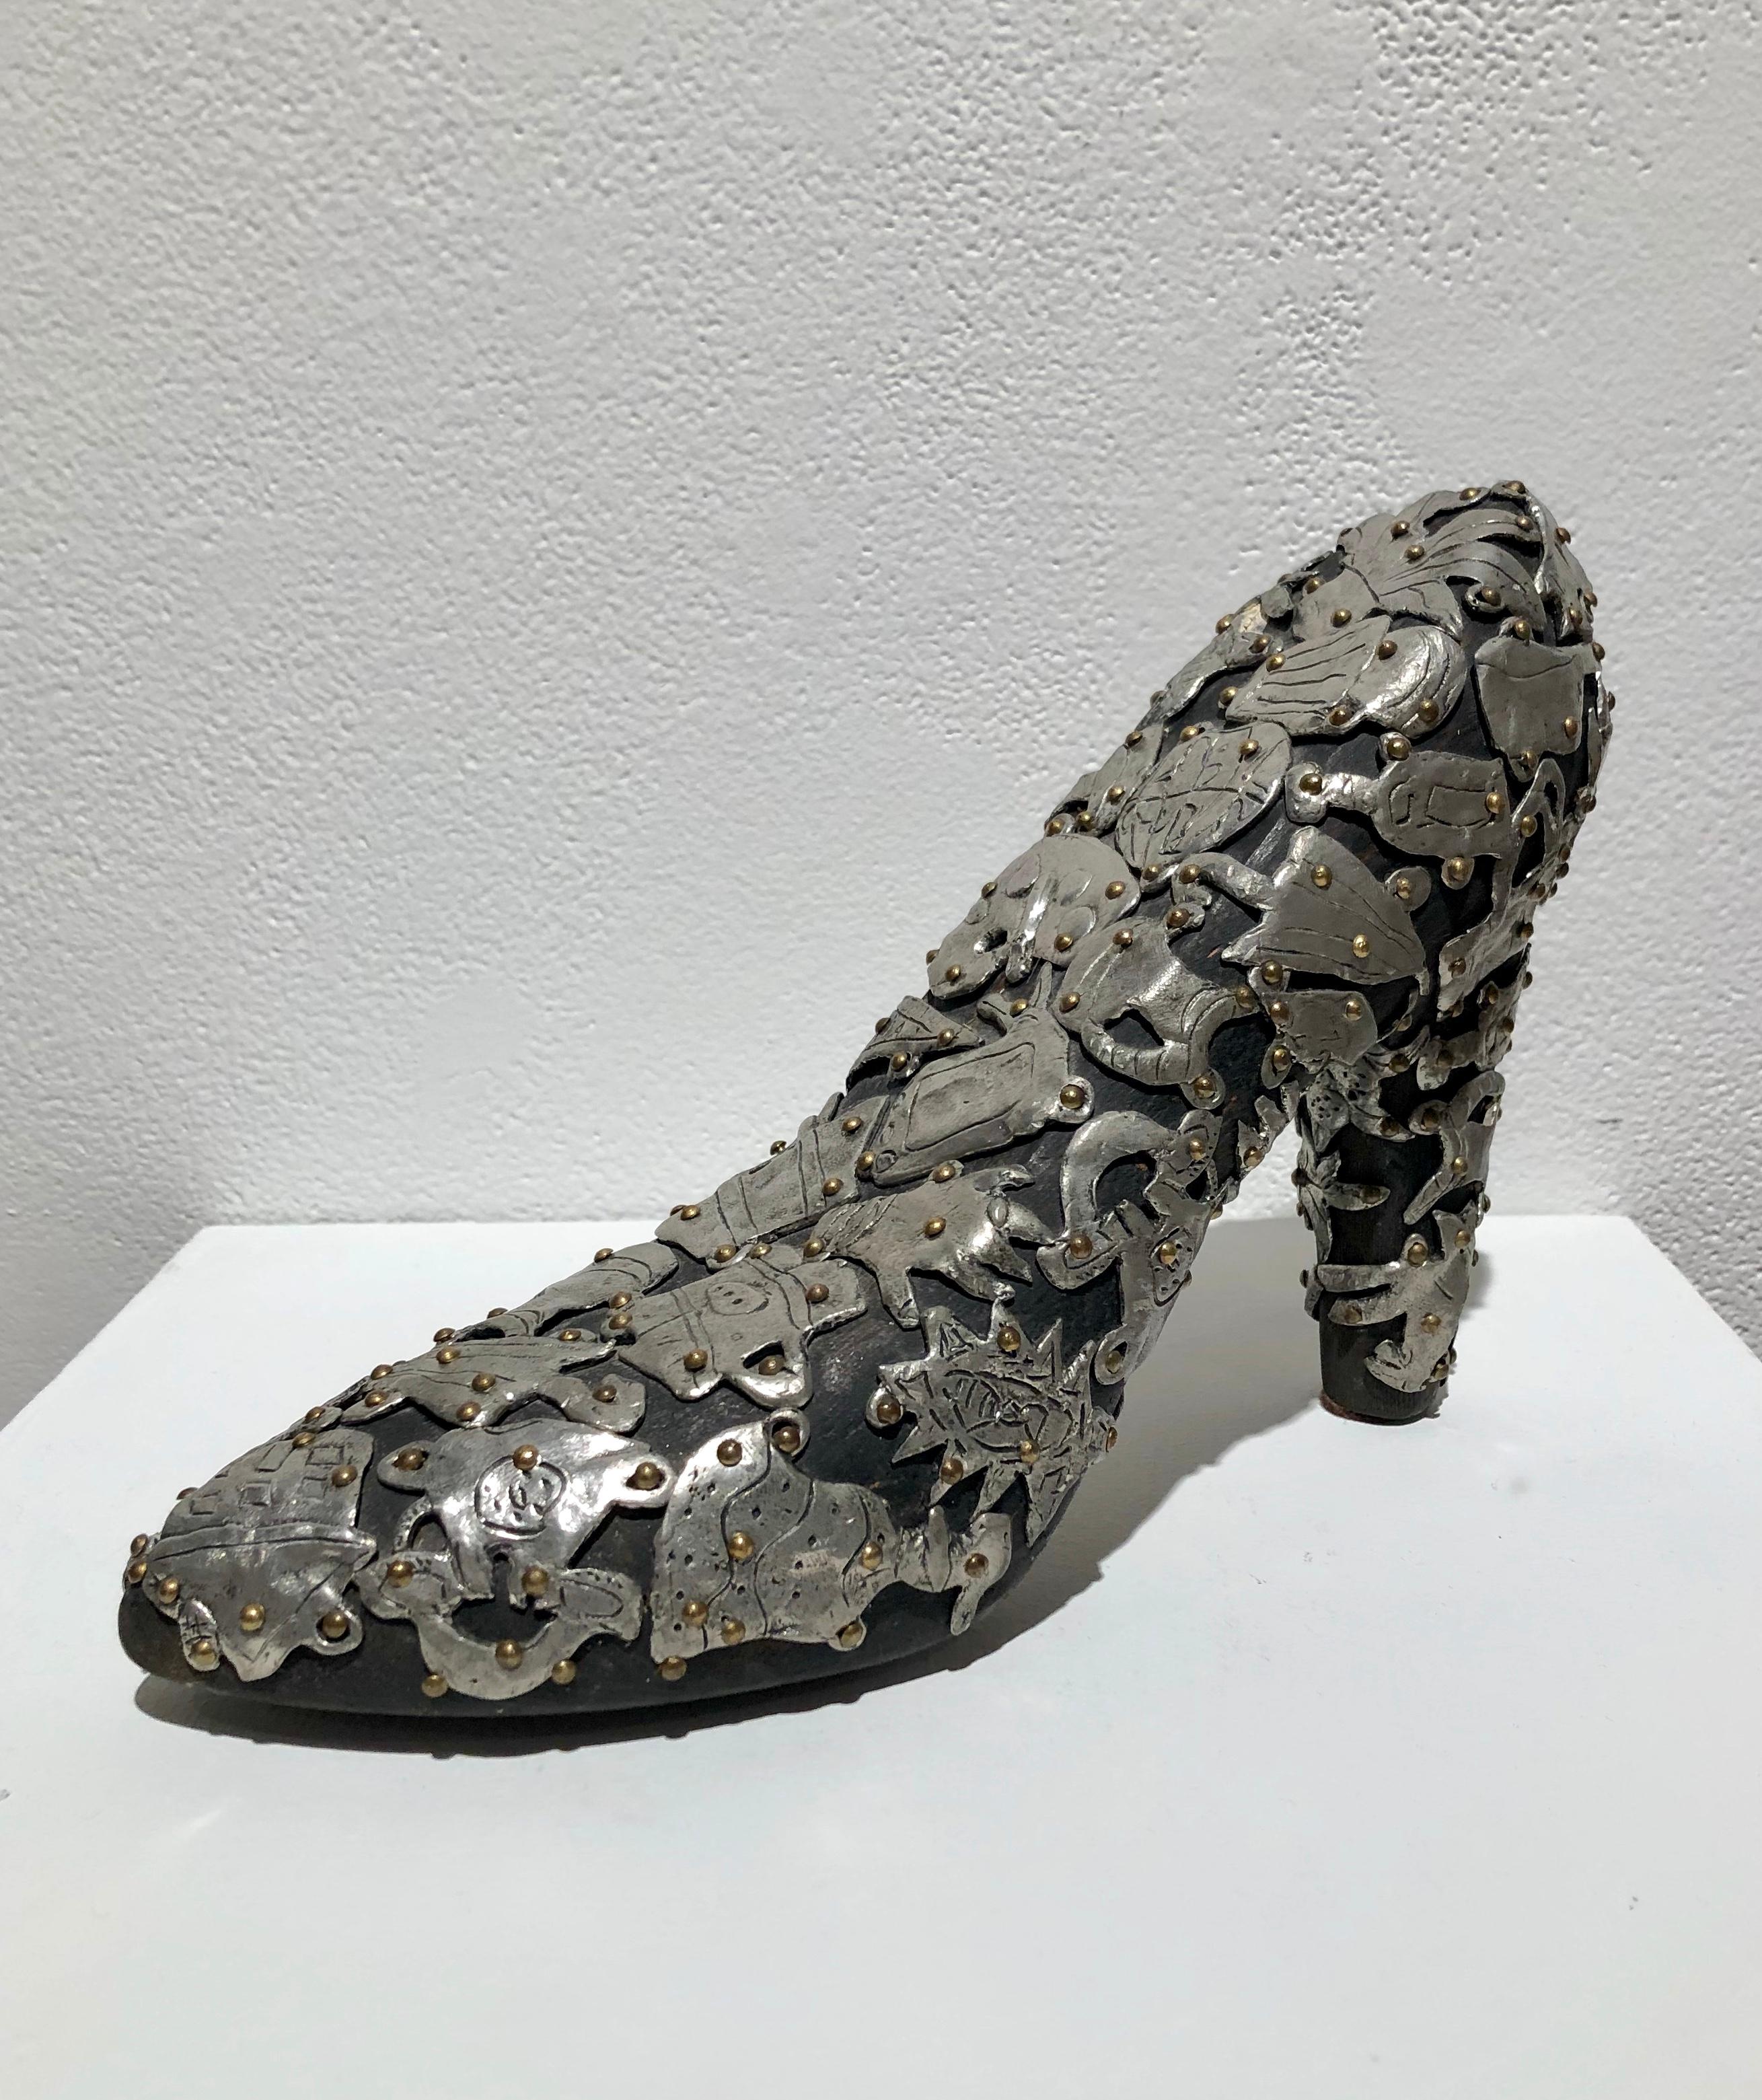  Shoe Sculpture , Female Pump  in wood covered with pewter and brass ornaments - Art by Claudia DeMonte